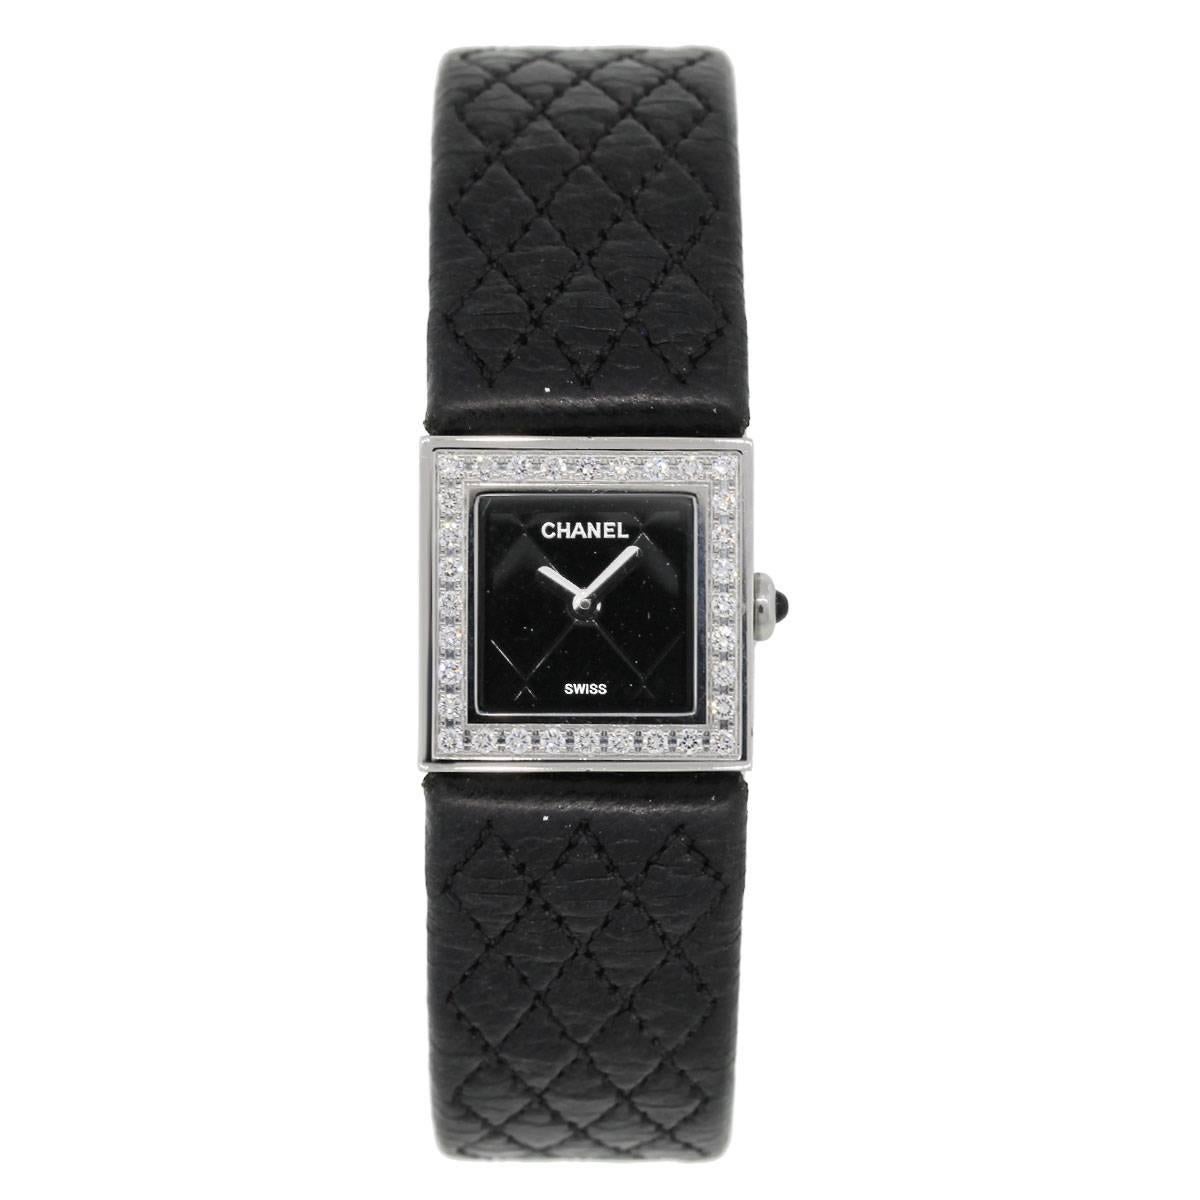 Brand: Chanel
Style: Mademoiselle
MPN: B03618
Case Material: Stainless steel
Case Diameter: 19mm x 19mm
Bezel: Diamond bezel (factory)
Dial: Black quilted dial
Bracelet: Chanel black leather strap (factory)
Crystal: Sapphire
Size: Will fit